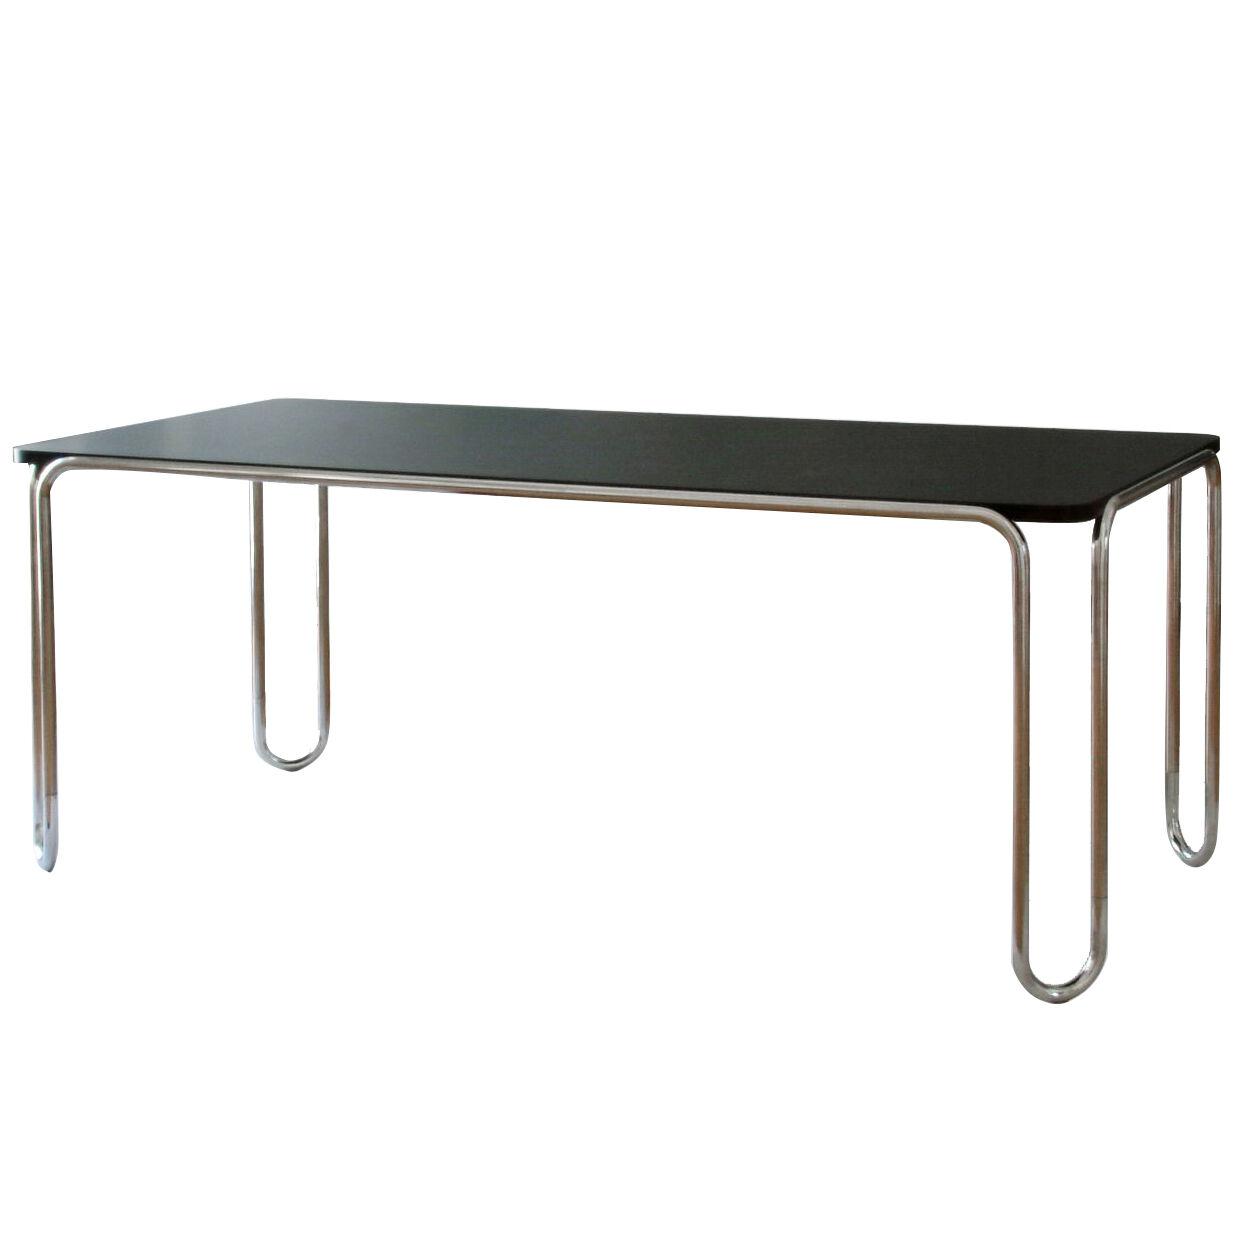 Customizable modernist tubular-steel table manufactured by GMD Berlin